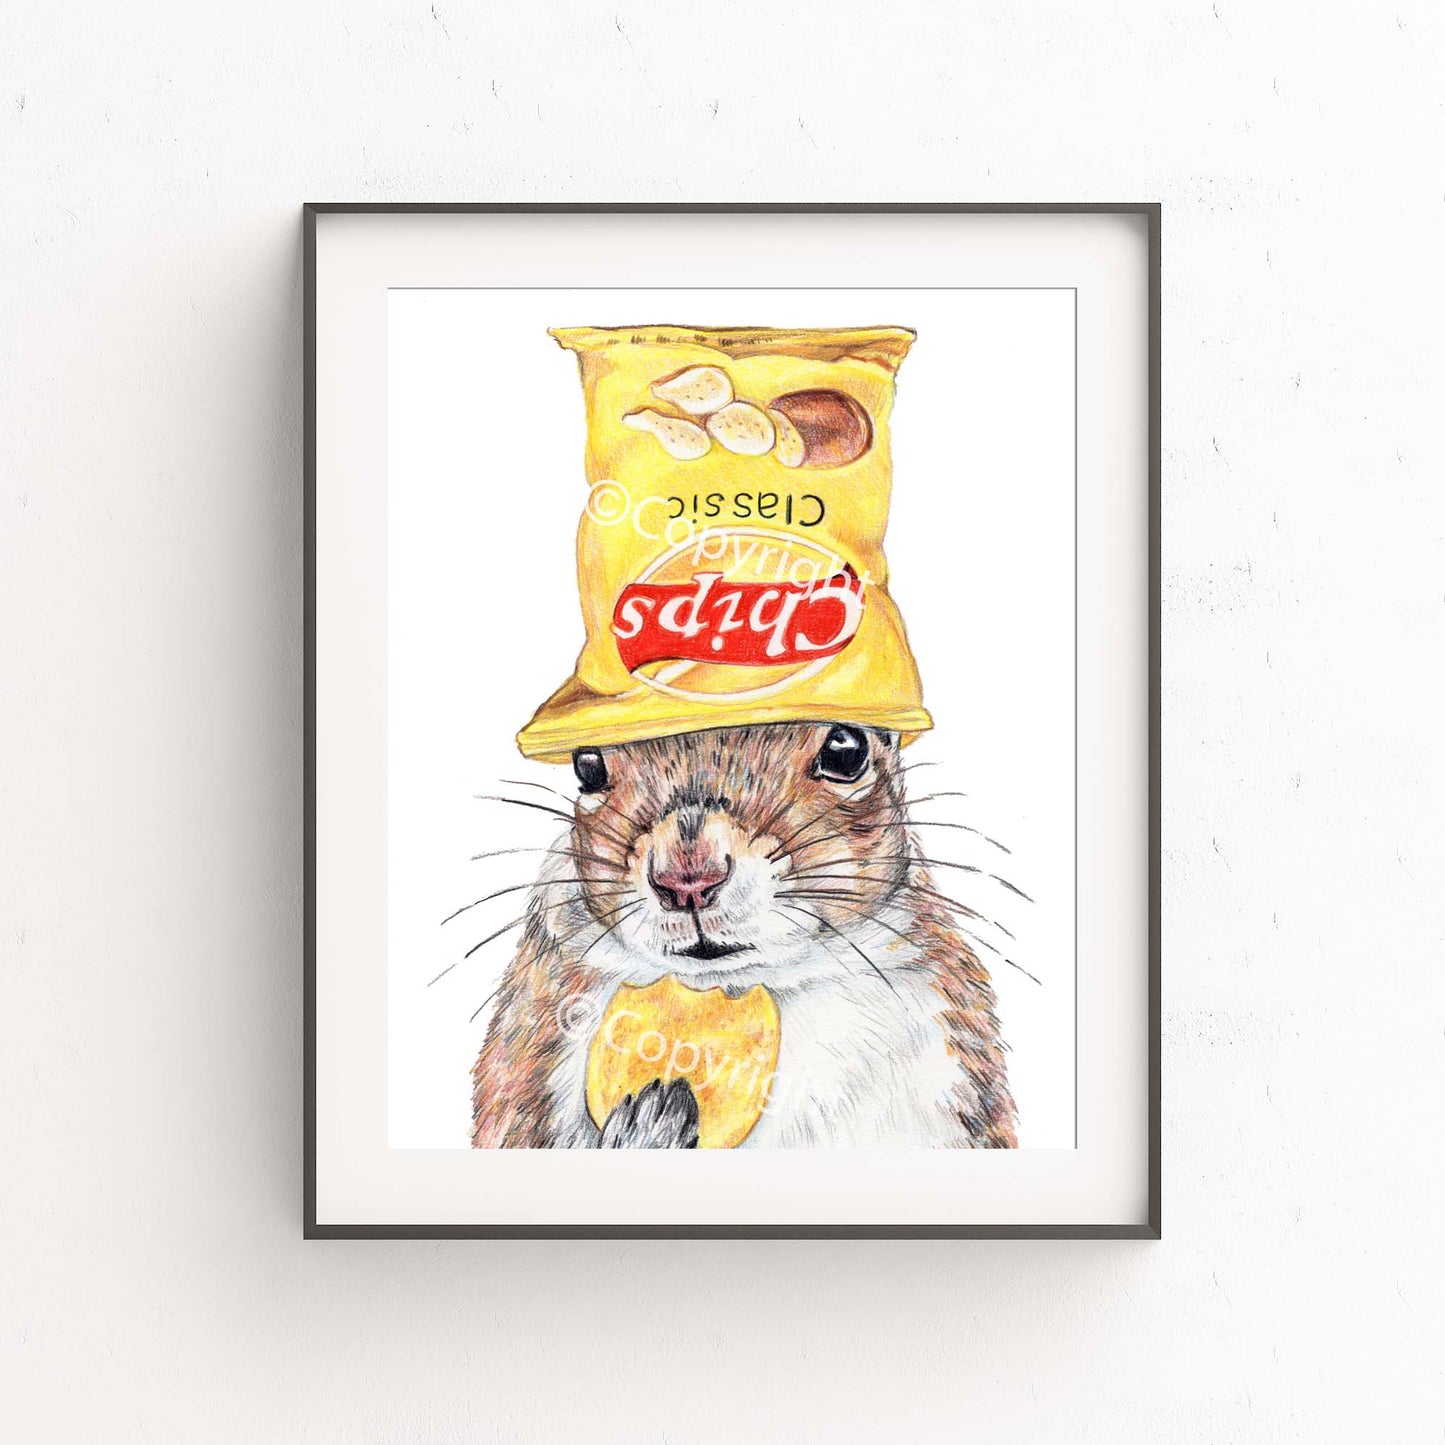 Coloured pencil drawing of a squirrel wearing a bright yellow potato chip bag on it's head. Art by Deidre Wicks